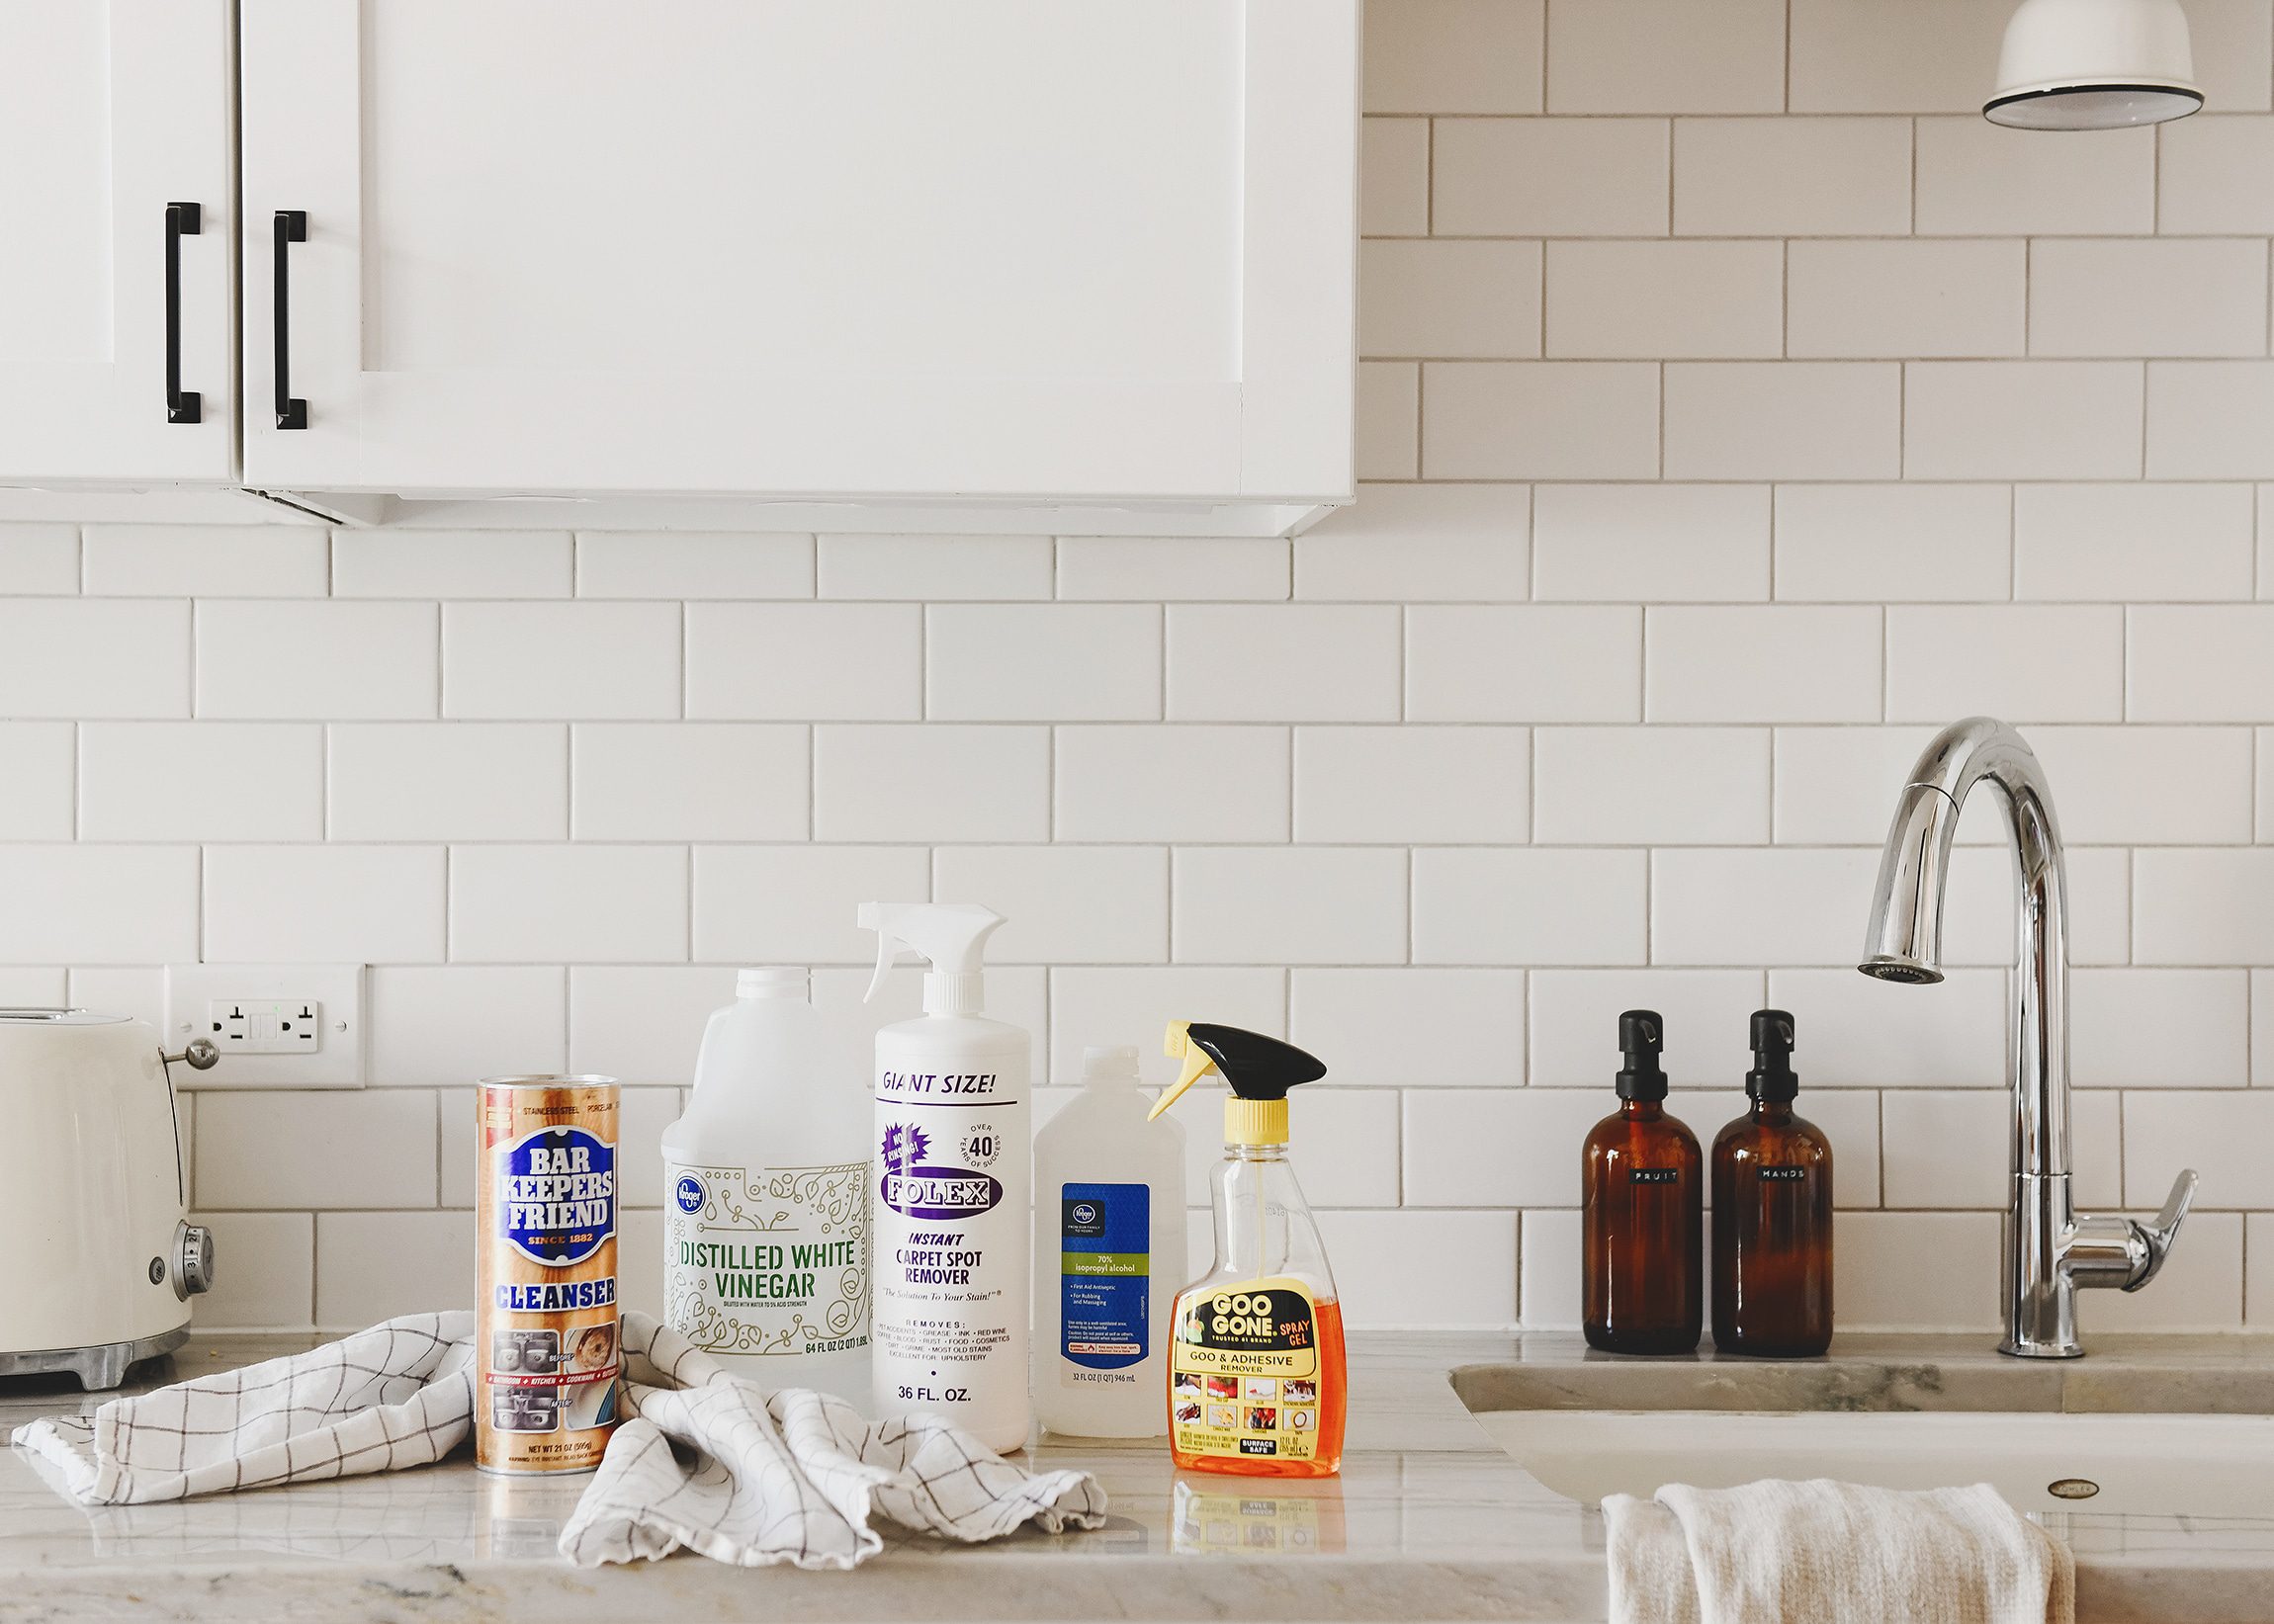 The top 5 value cleaning products in our home // via yellow brick home